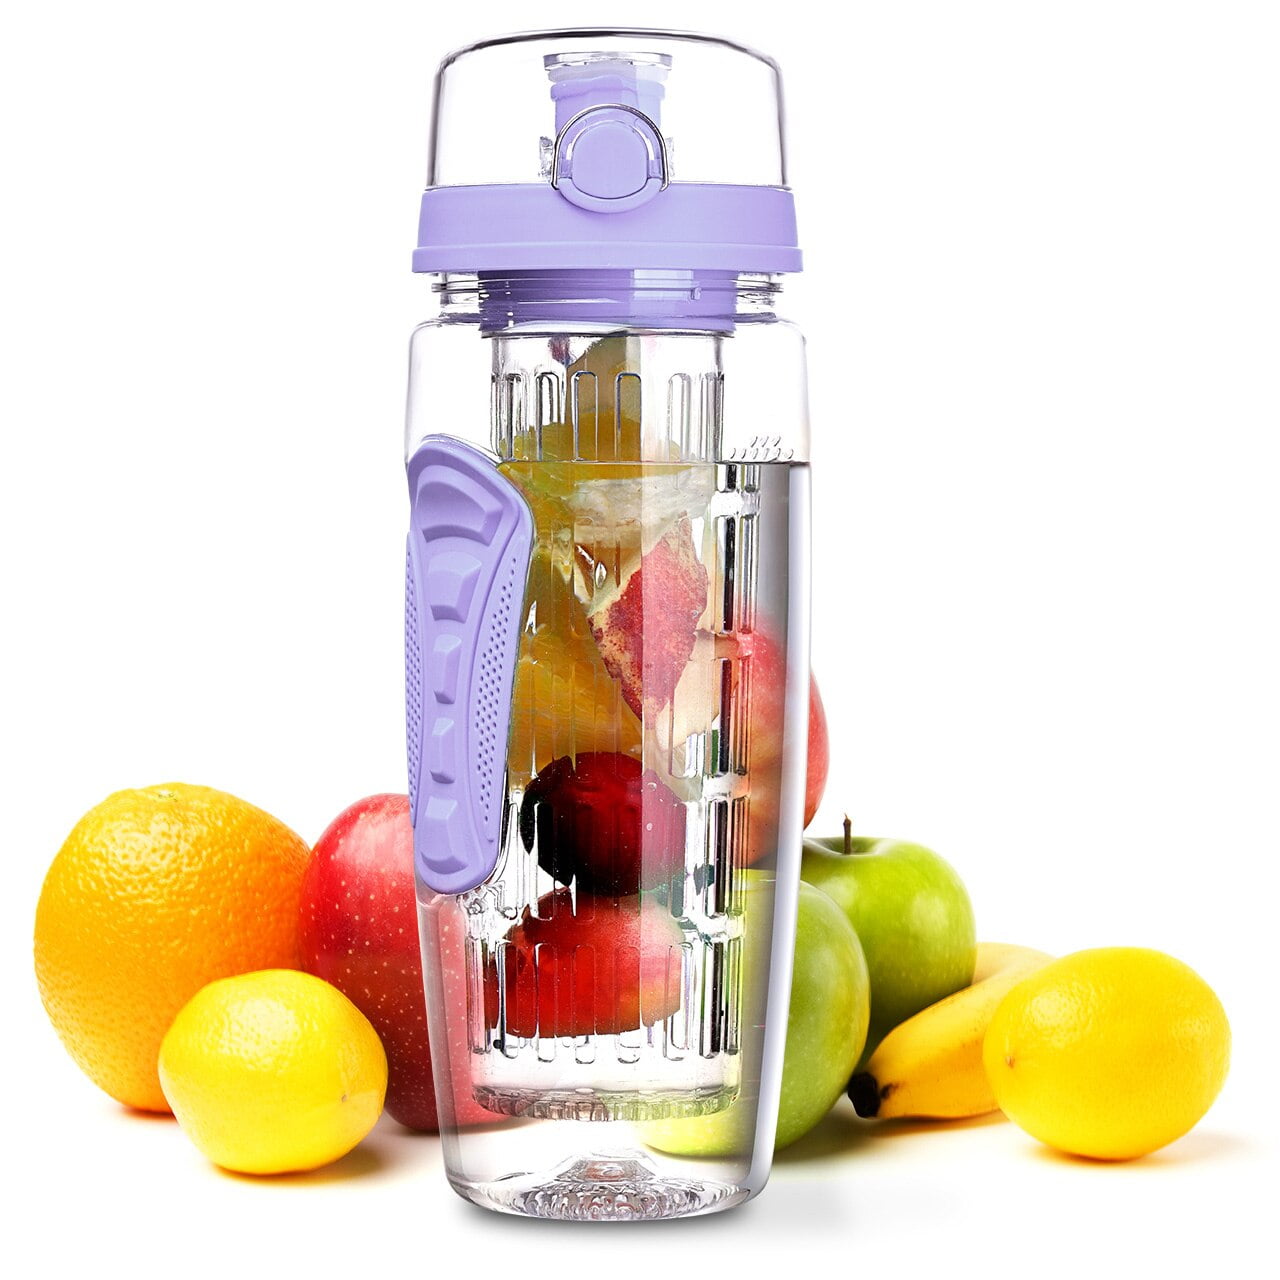 Filter Water Bottle - Fruit Infuser - Best Personal Outdoor Drink - Sports,  Hiking, Camping, Fishing…See more Filter Water Bottle - Fruit Infuser 